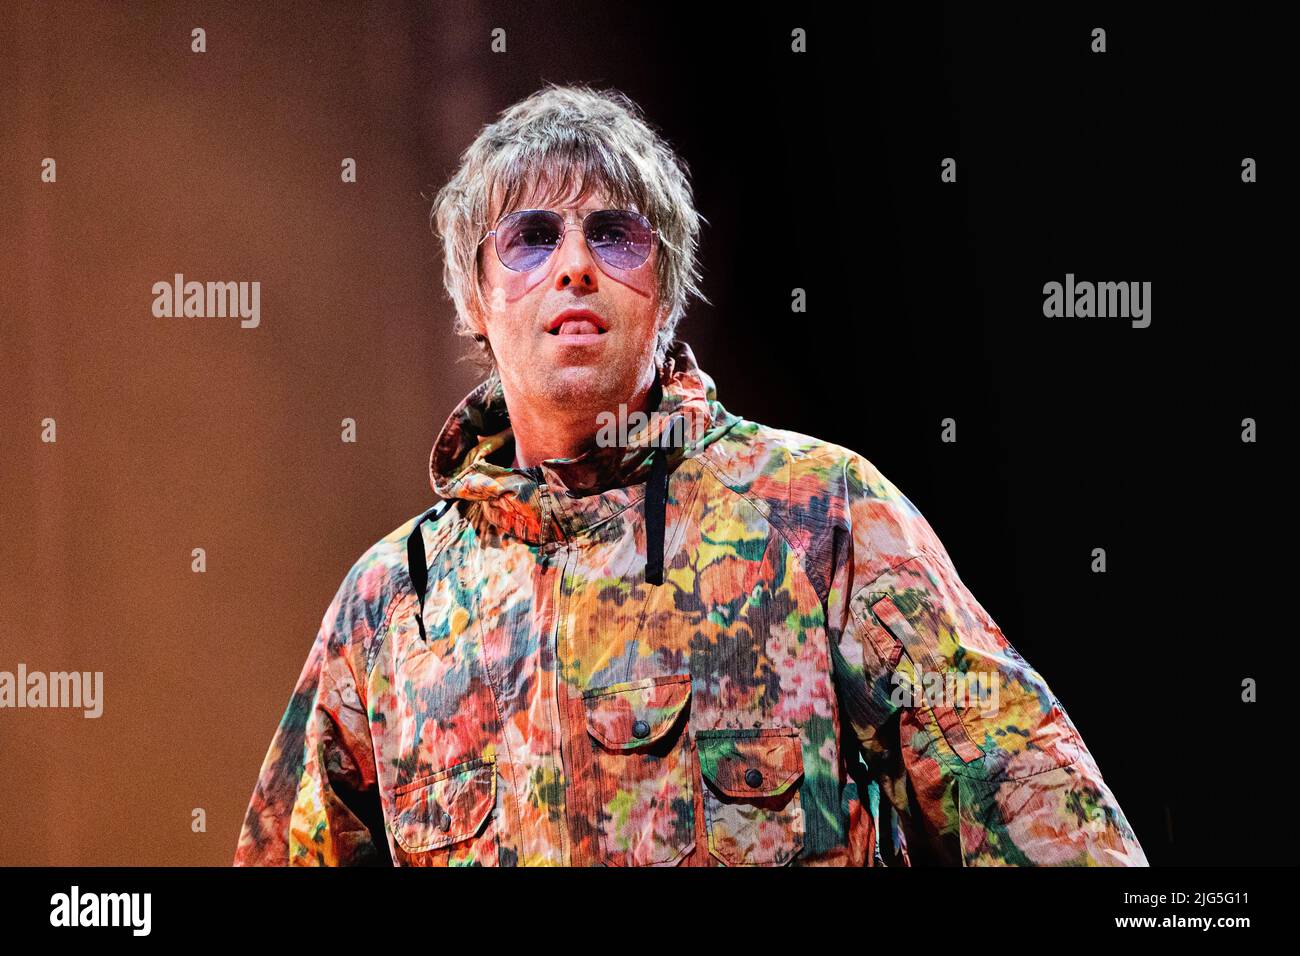 Luca Italy 6 July 2022 Liam Gallagher - Live at Lucca Summer Festival © Andrea Ripamonti / Alamy Foto Stock